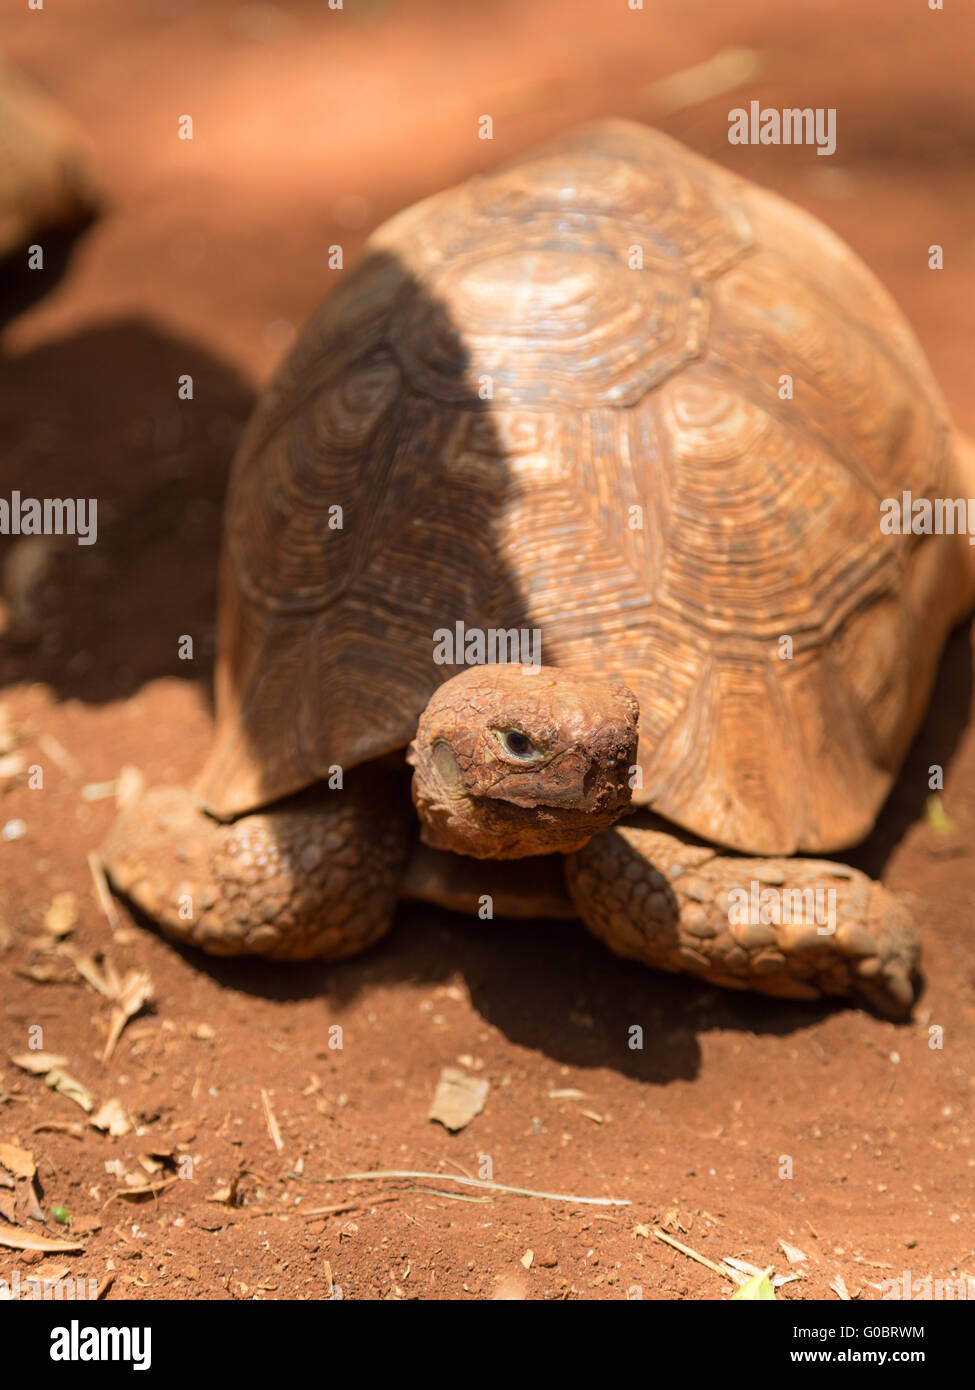 An african turtle looking up at the photographer. Stock Photo